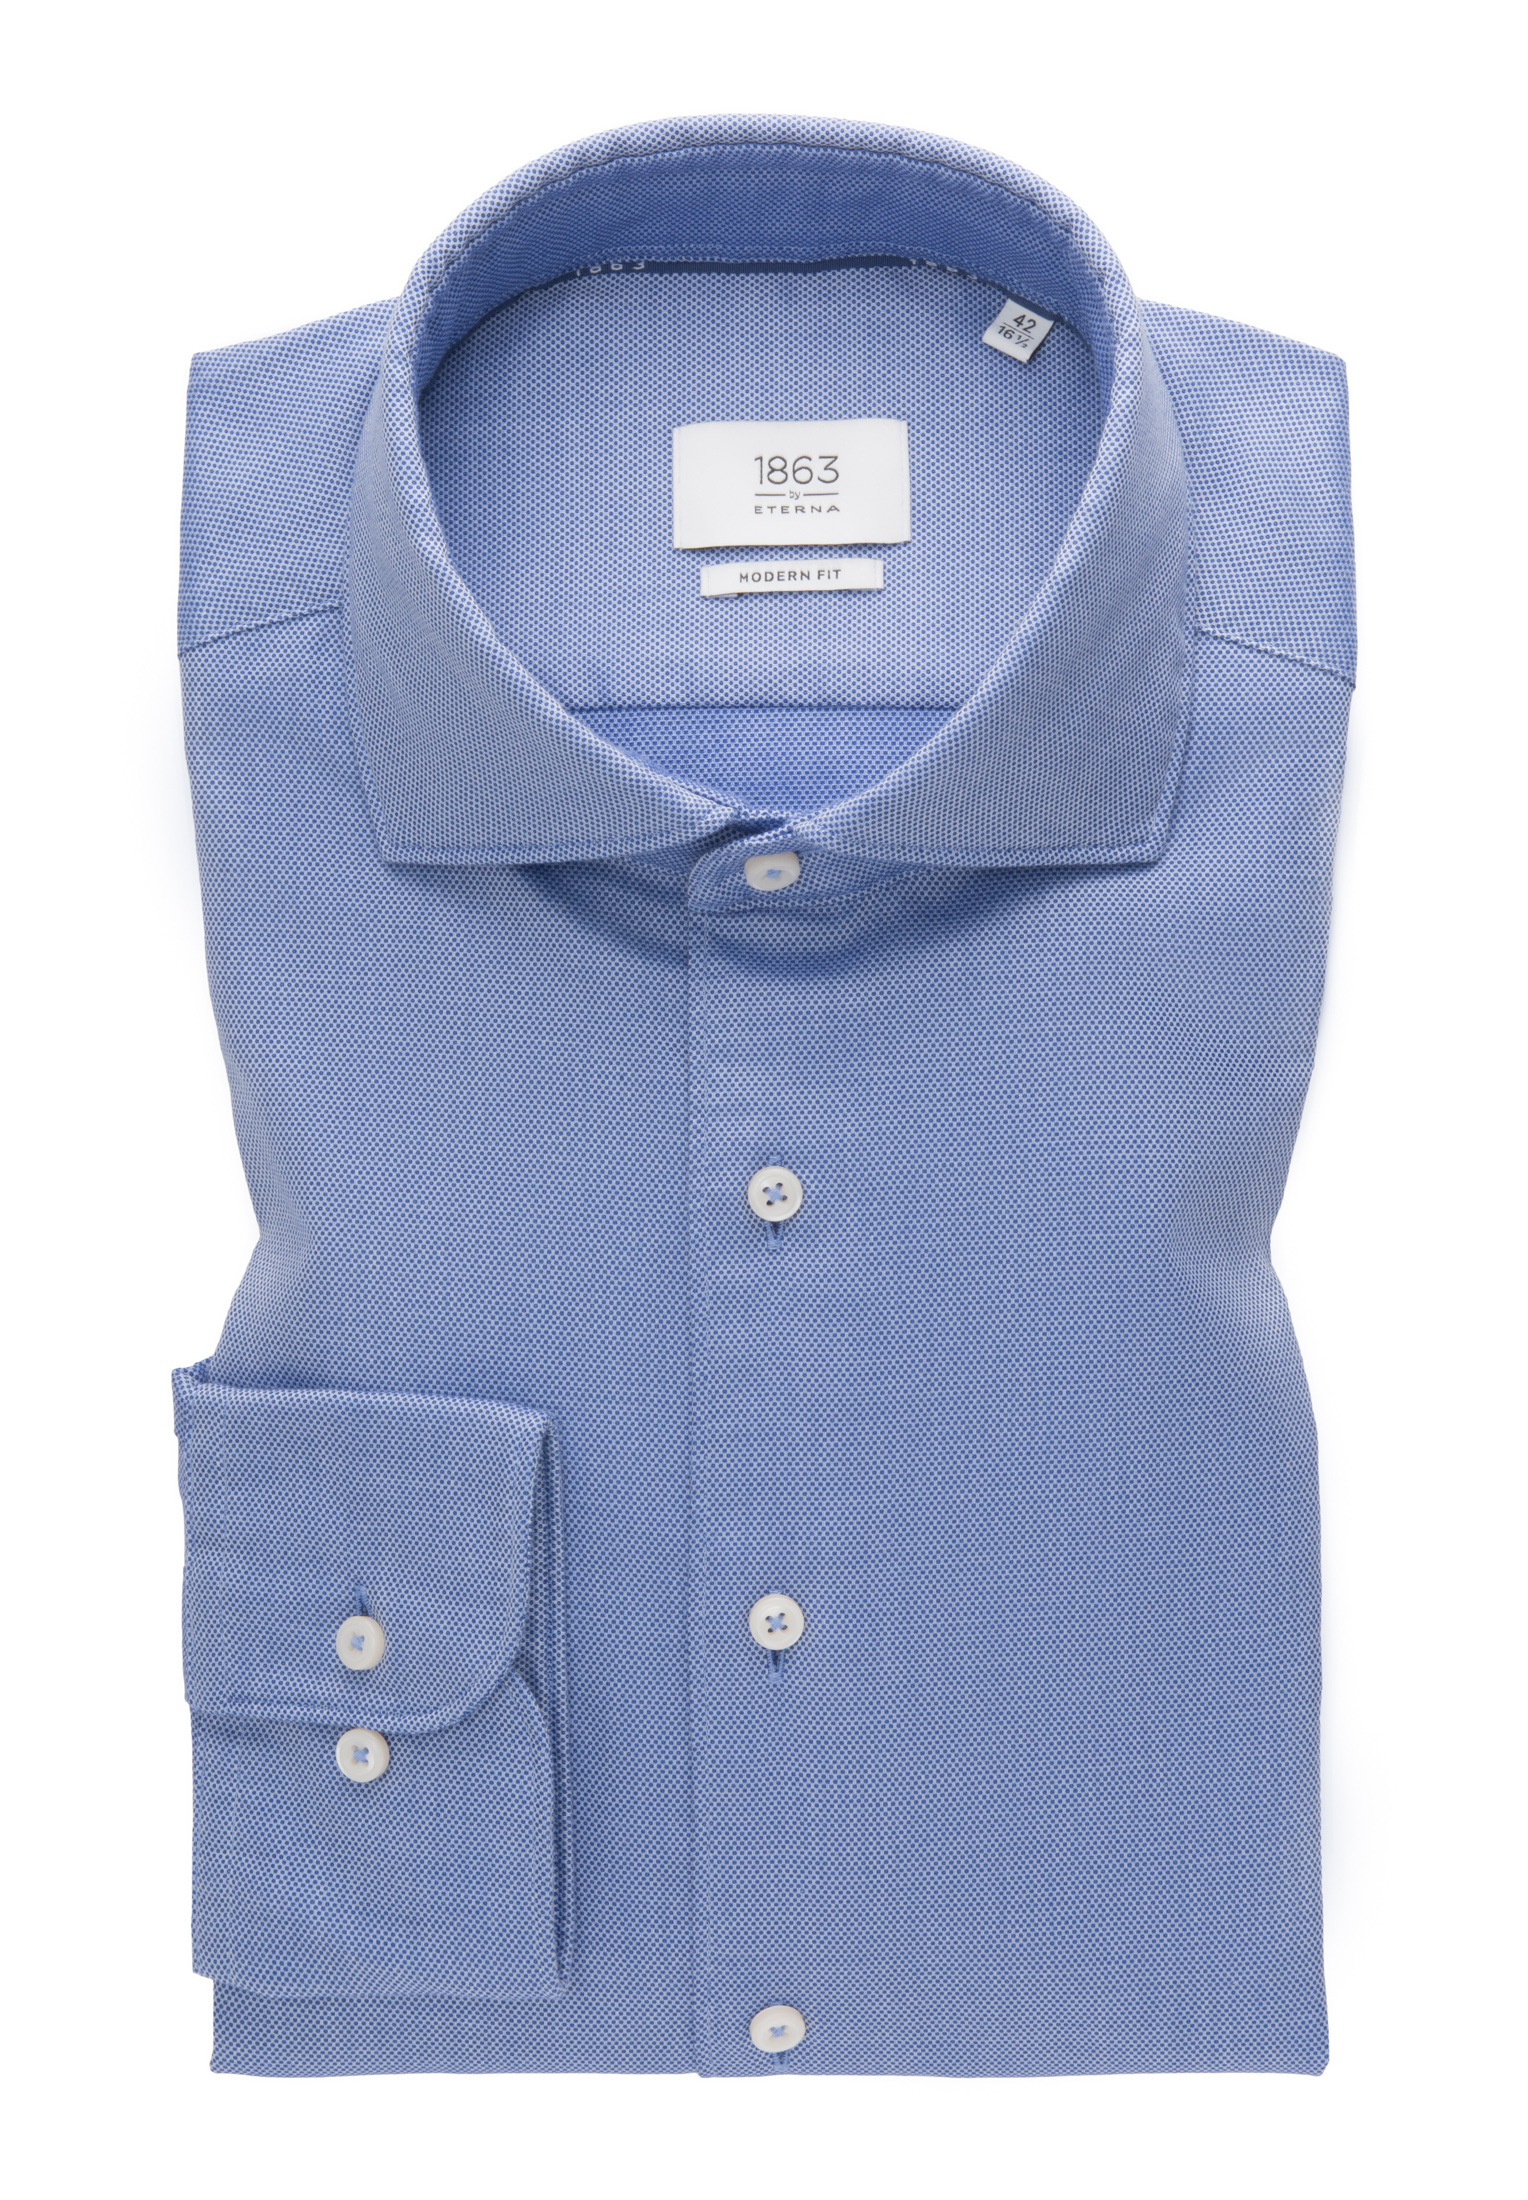 MODERN FIT Shirt in sky blue structured